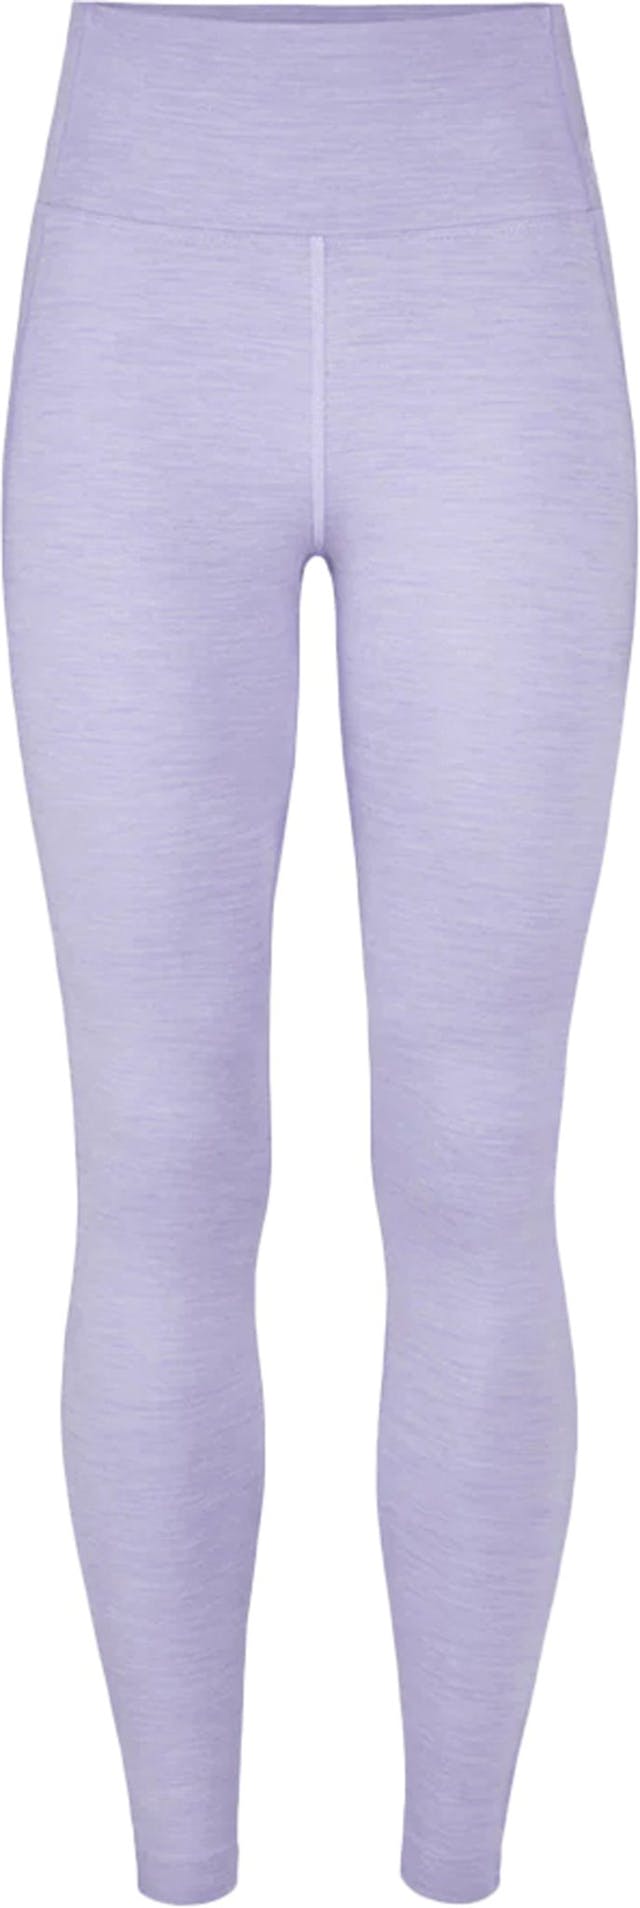 Product image for Natural Flow Legging - Women's